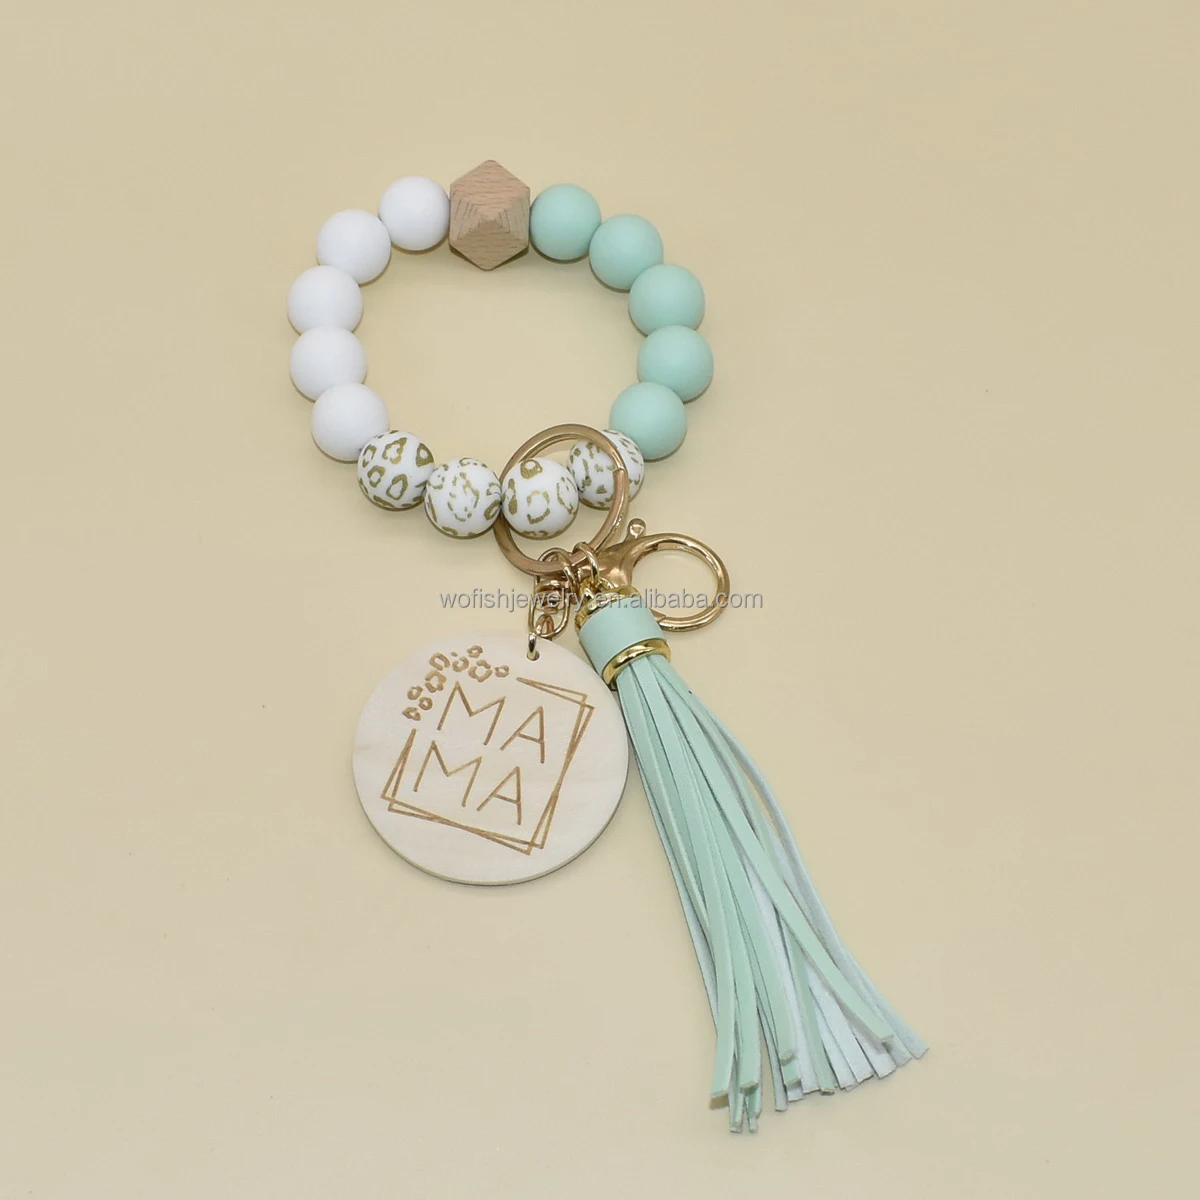 

Wofish New Silicone Leopards Beads Mint Colors Tassel With Engraved MAMA wooden Disc Keychain wristlet bracelet for mom gifts